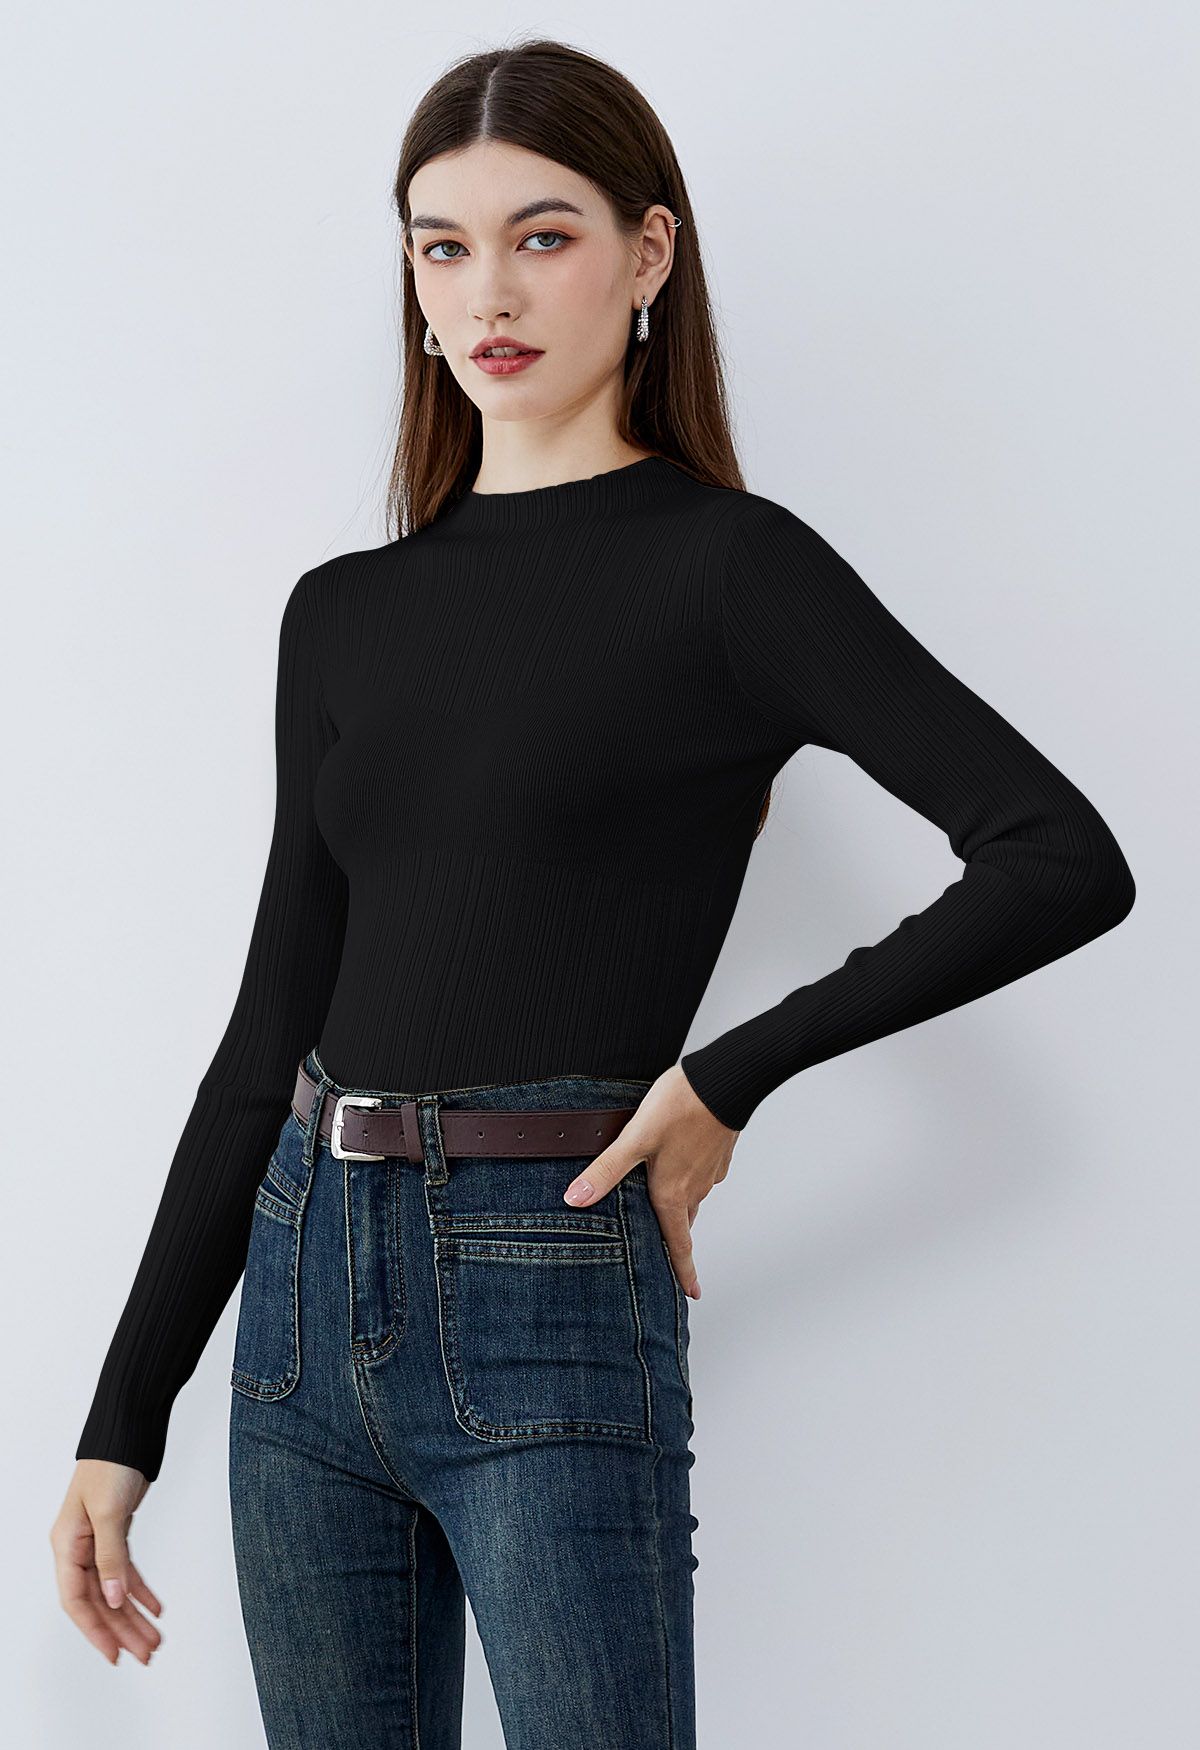 Stripe Texture Fitted Crop Top in Black - Retro, Indie and Unique Fashion